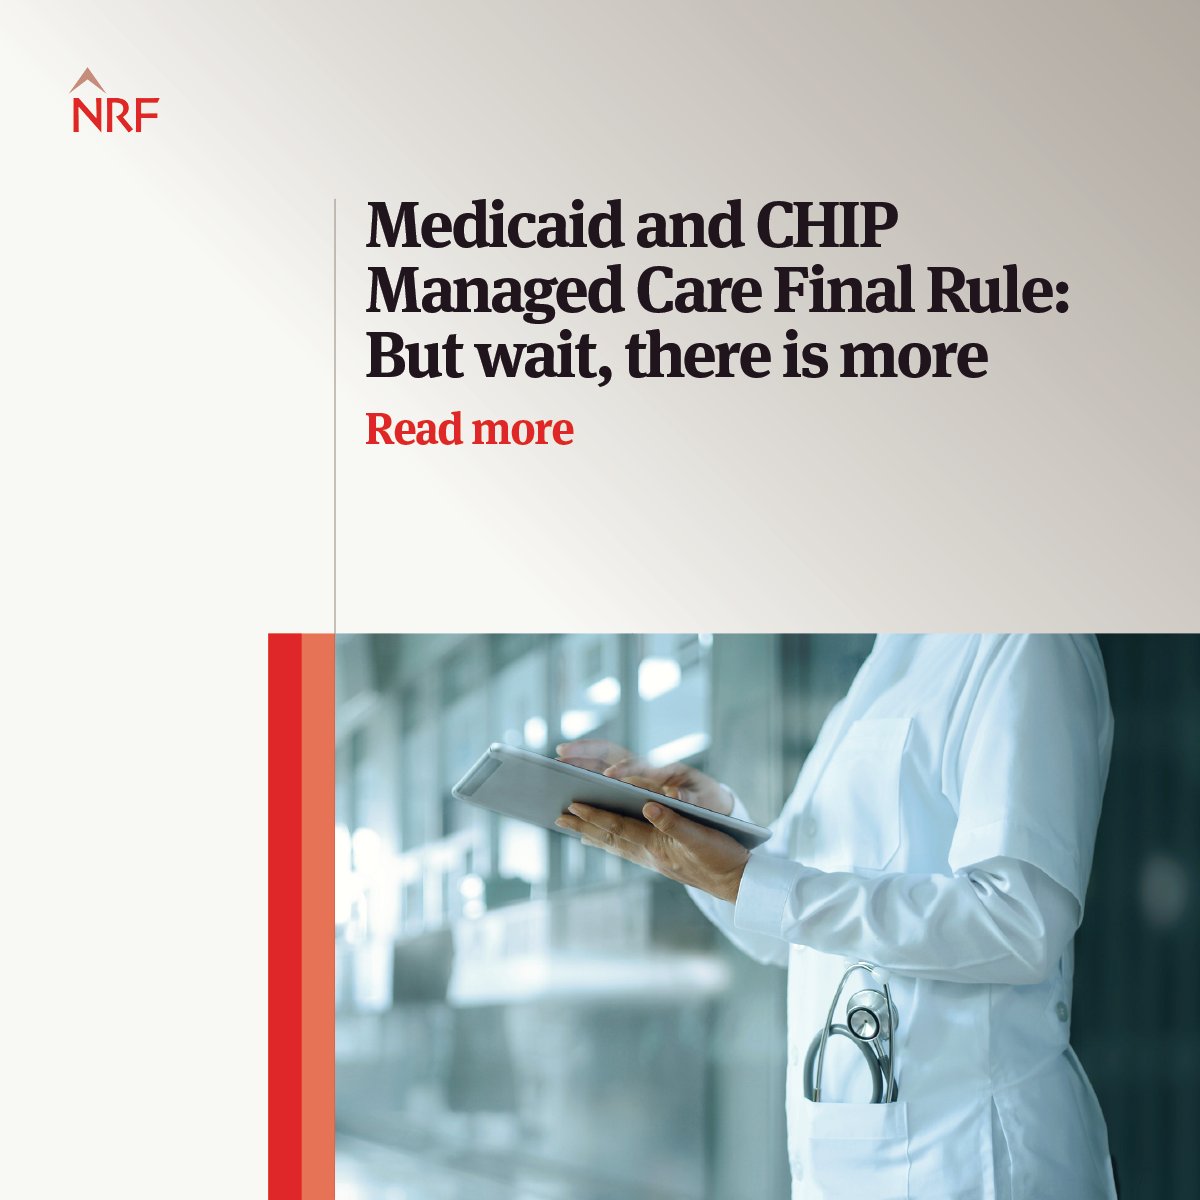 Susan Feigin Harris, Jeff Wurzburg, Kathleen Rubinstein and Erin Riley discuss CMS’ recently released an unpublished version of its Medicaid and CHIP Managed Care Final Rule. ow.ly/6rPZ50Rw9Go